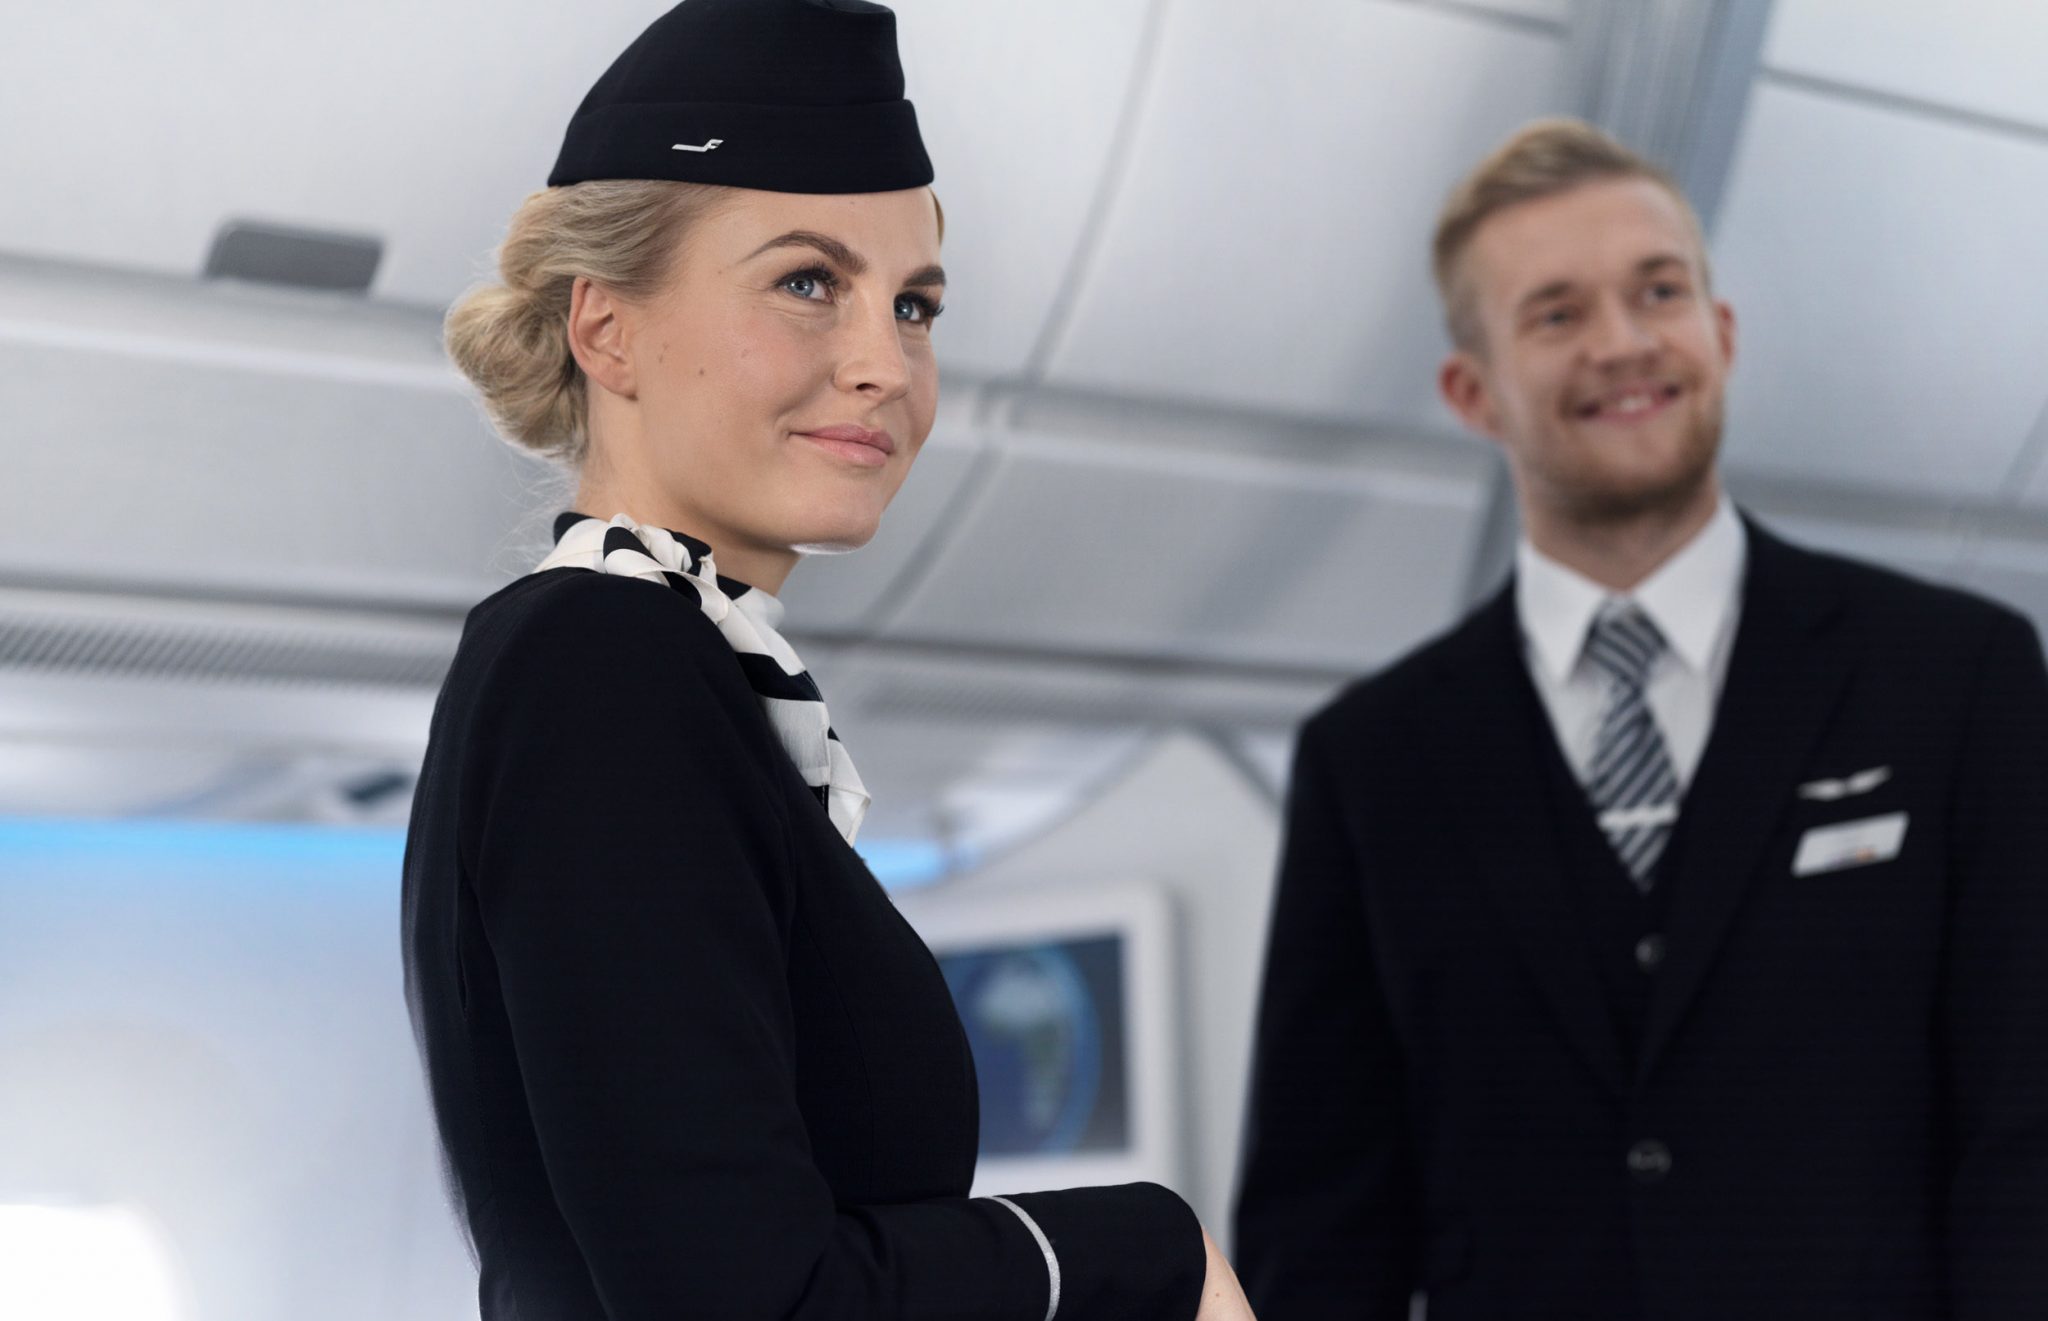 Finnair is Recruiting 'Hundreds' Of New Cabin Crew as it Plans to Double Asian Traffic by 2018